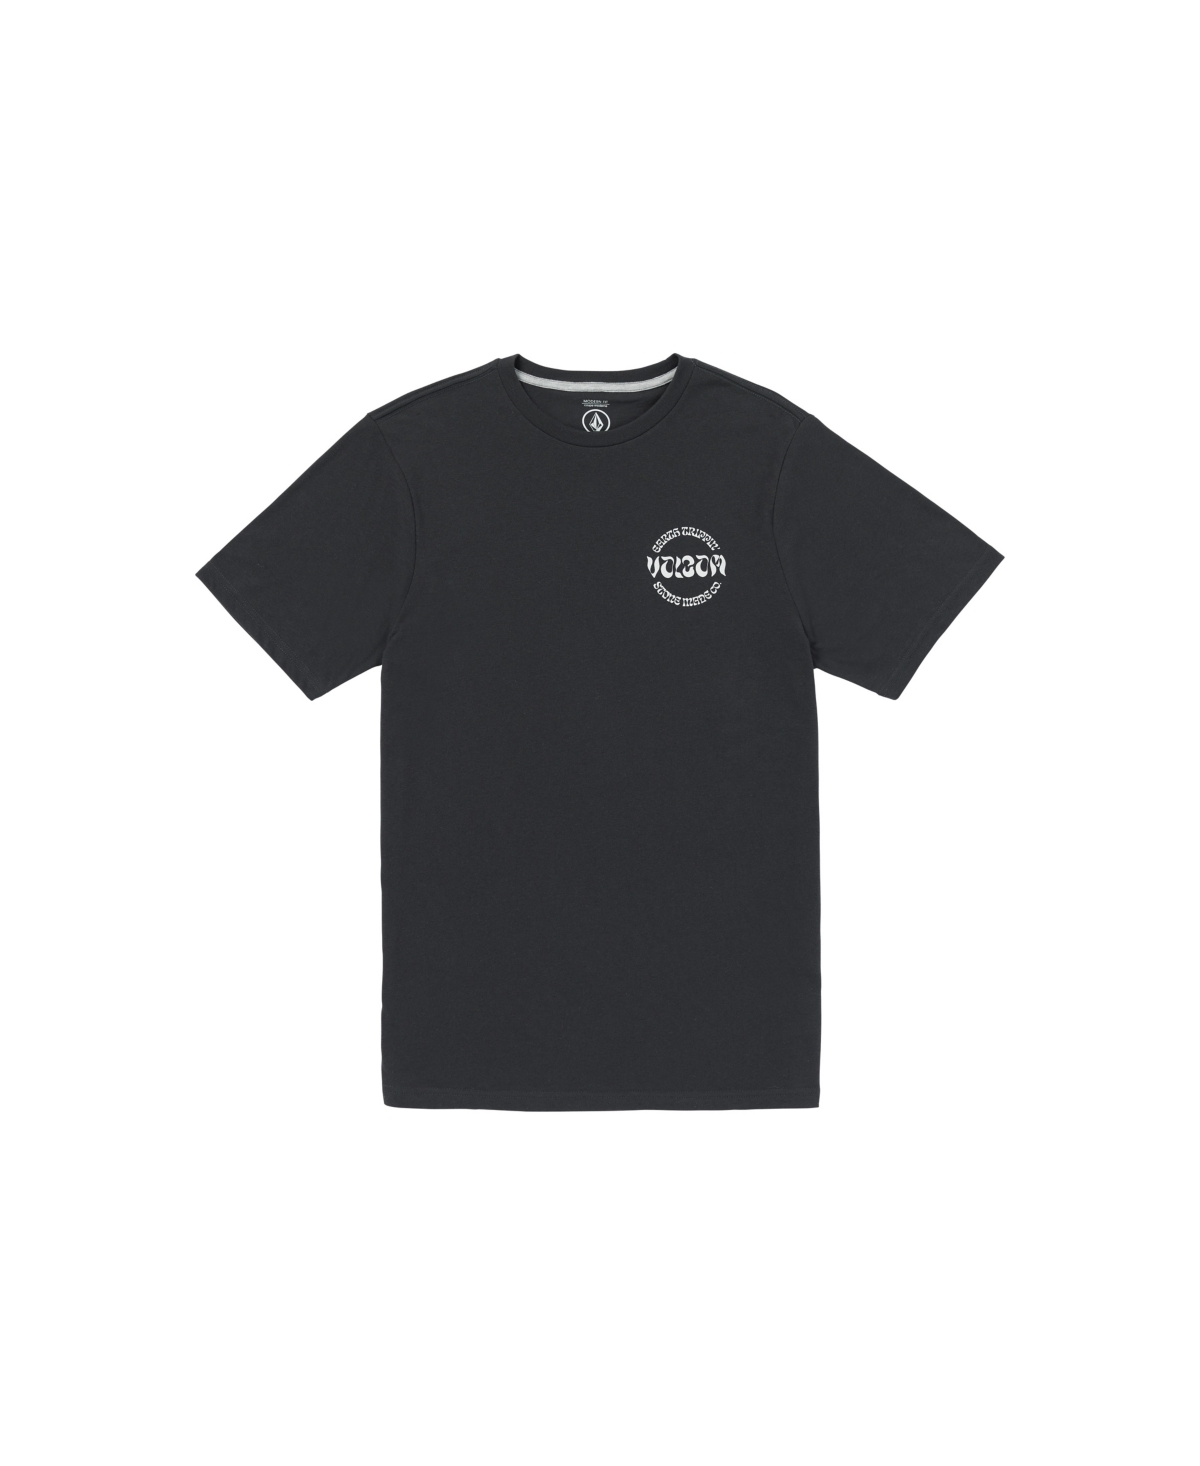 Stoneature Short Sleeve Tee T-shirt - Washed Black Heather